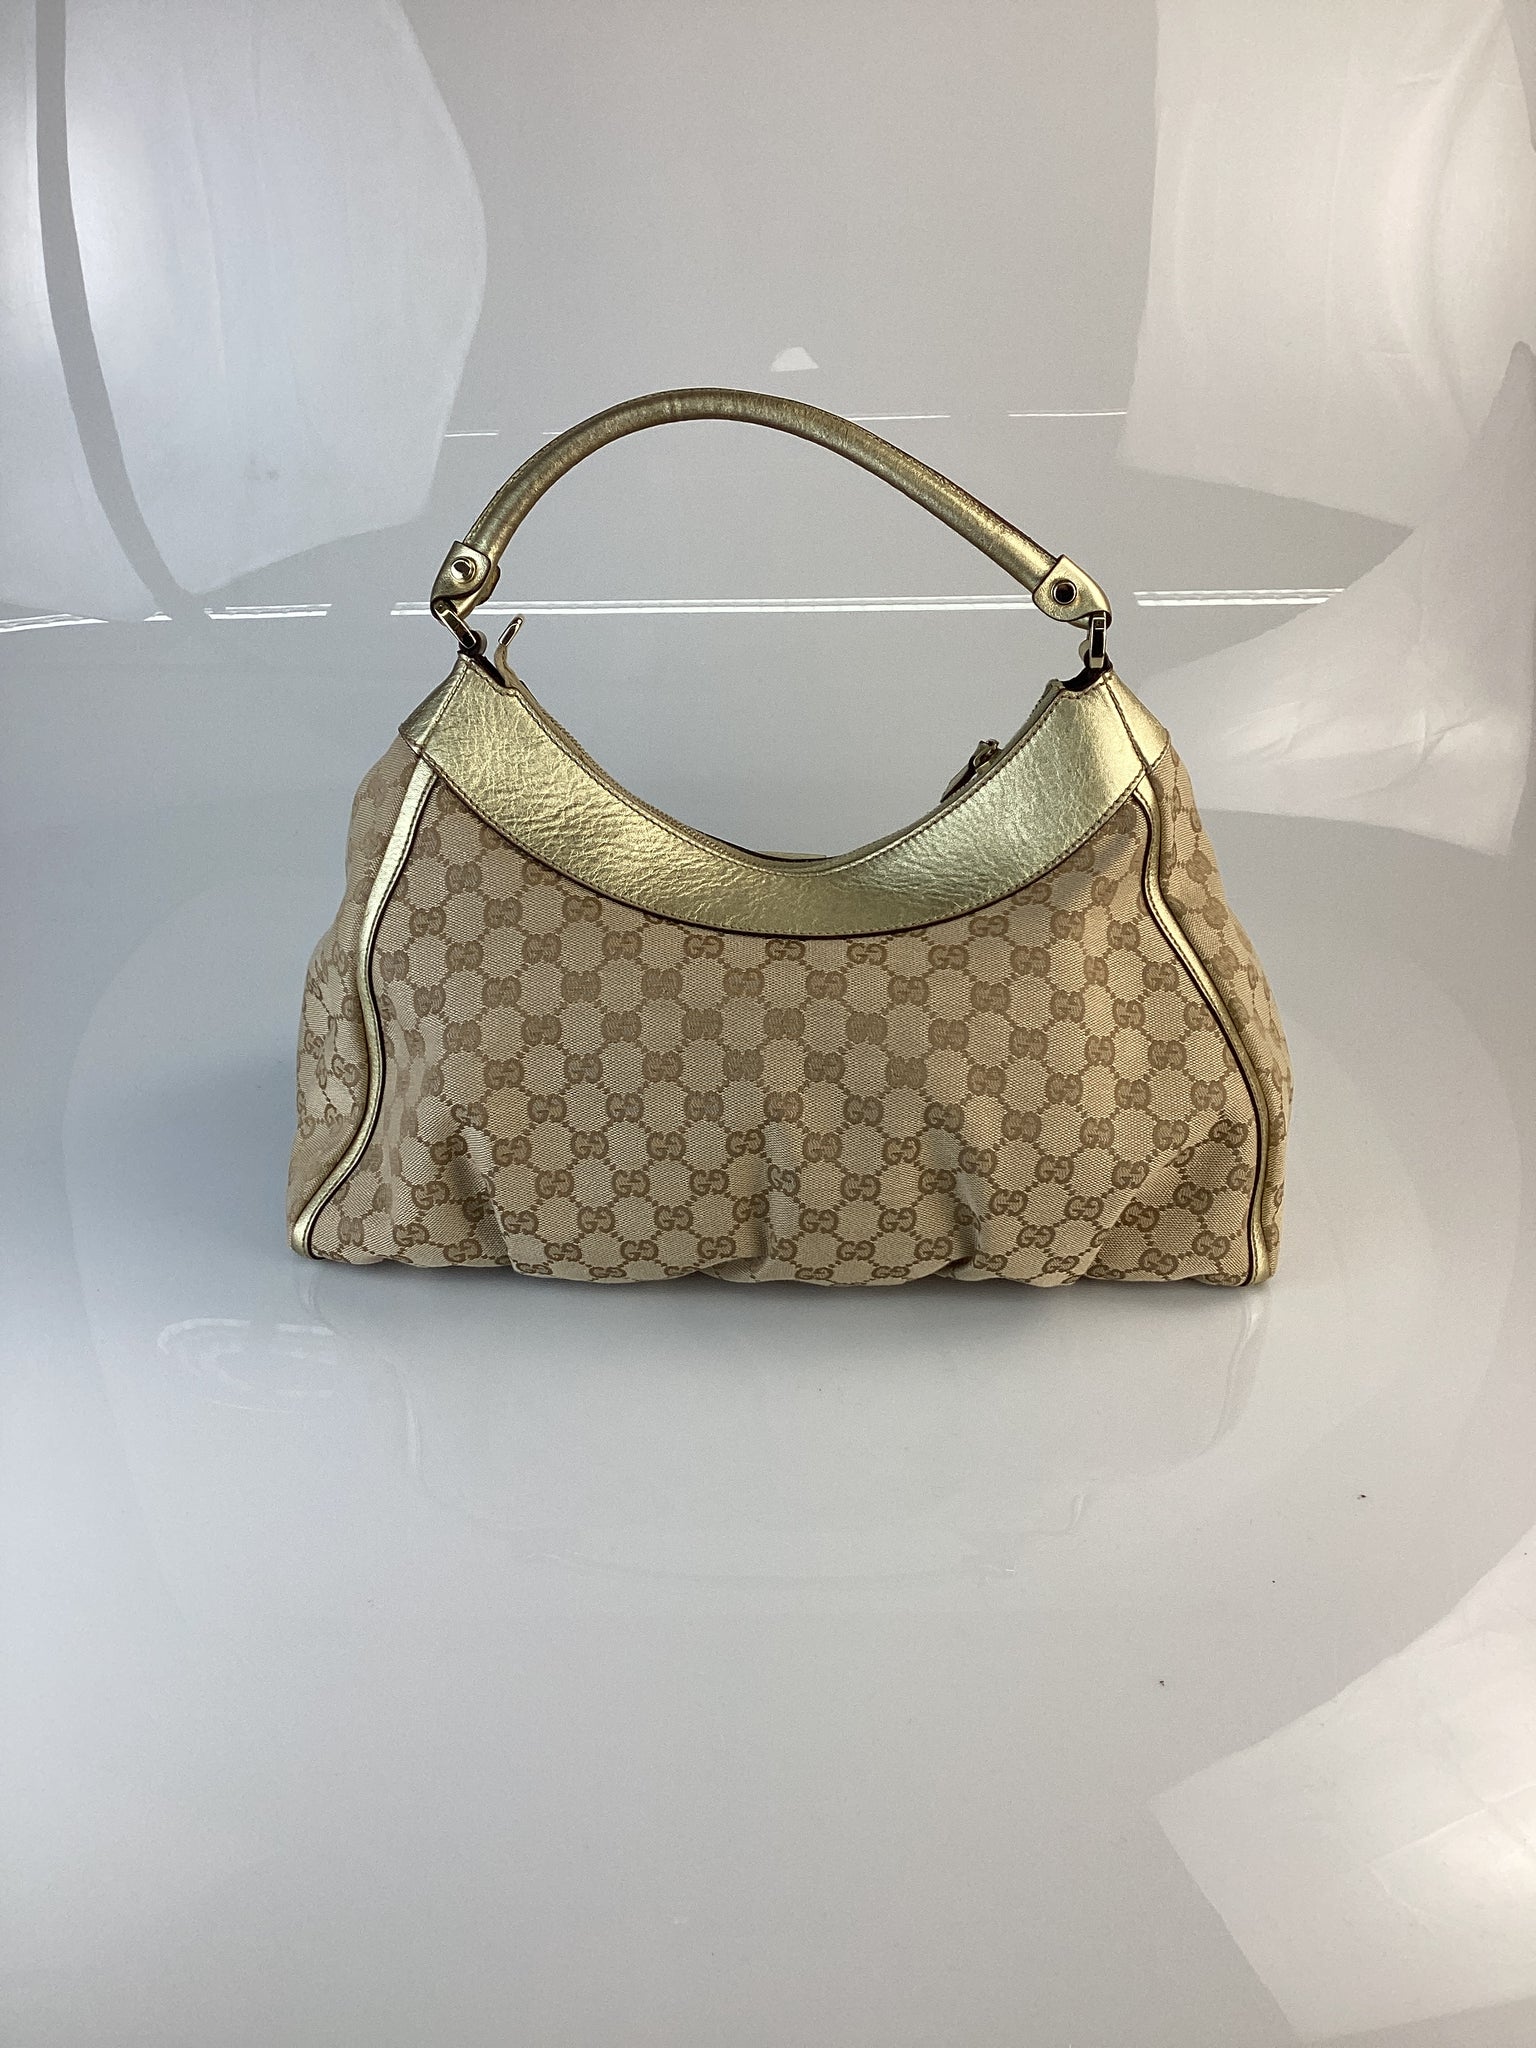 PRELOVED Gucci GG Canvas Abbey D-Ring Shoulder Bag WBKGDBH 041224 B